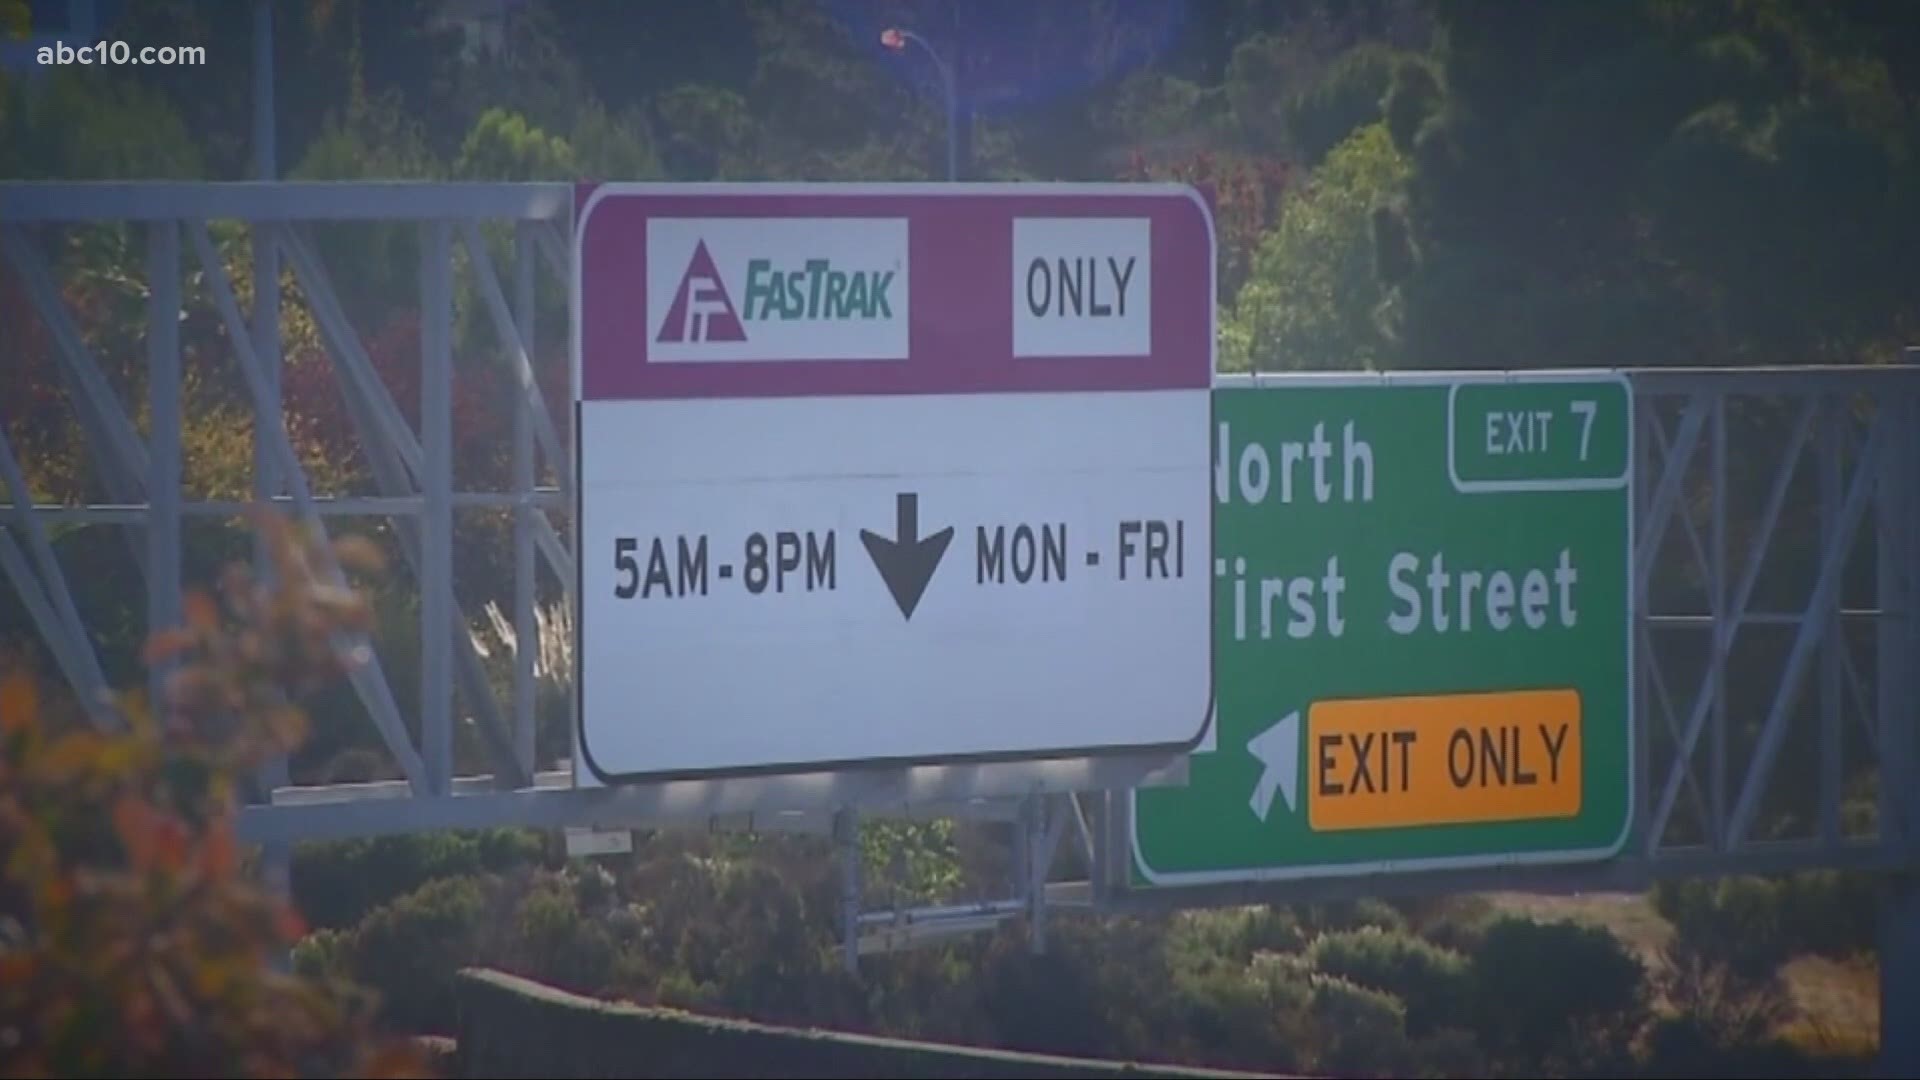 Other project proposals include widening the highway which, with the tolls, Caltrans says could mean faster drive times.